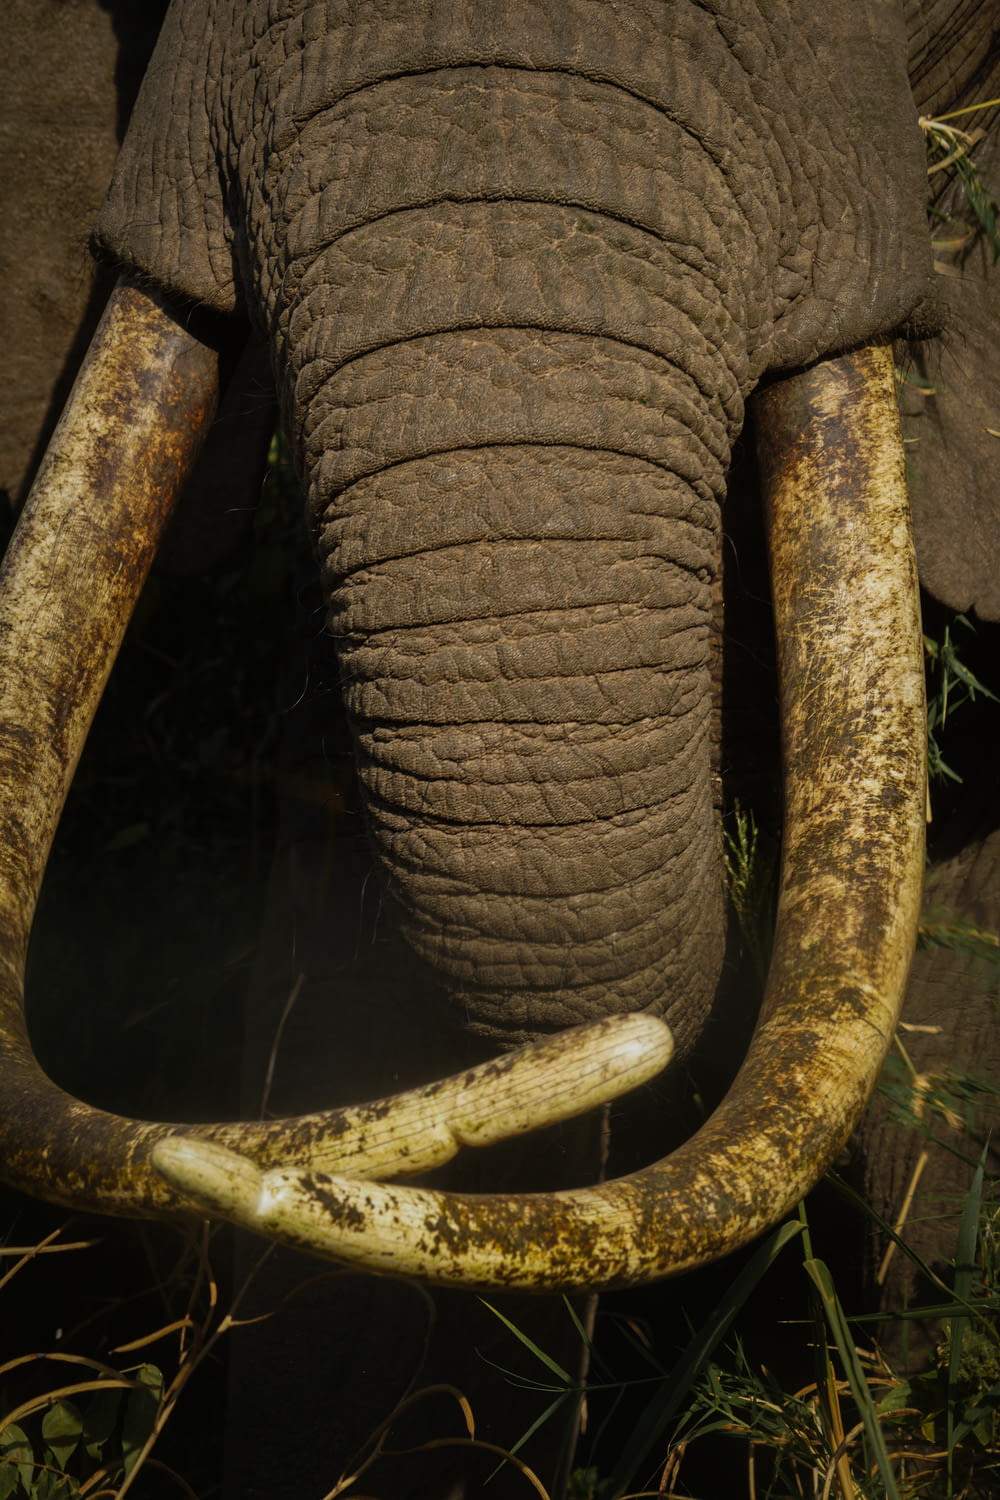 a close up of an elephant's trunk and tusks